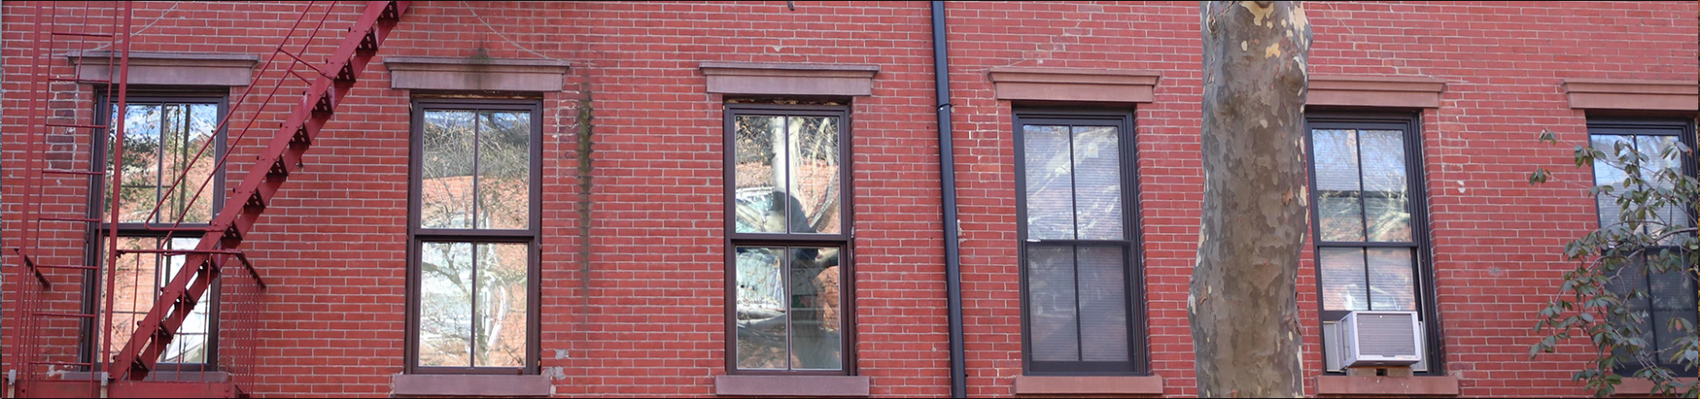 How To Make that Old Leaky Masonry Row House Airtight